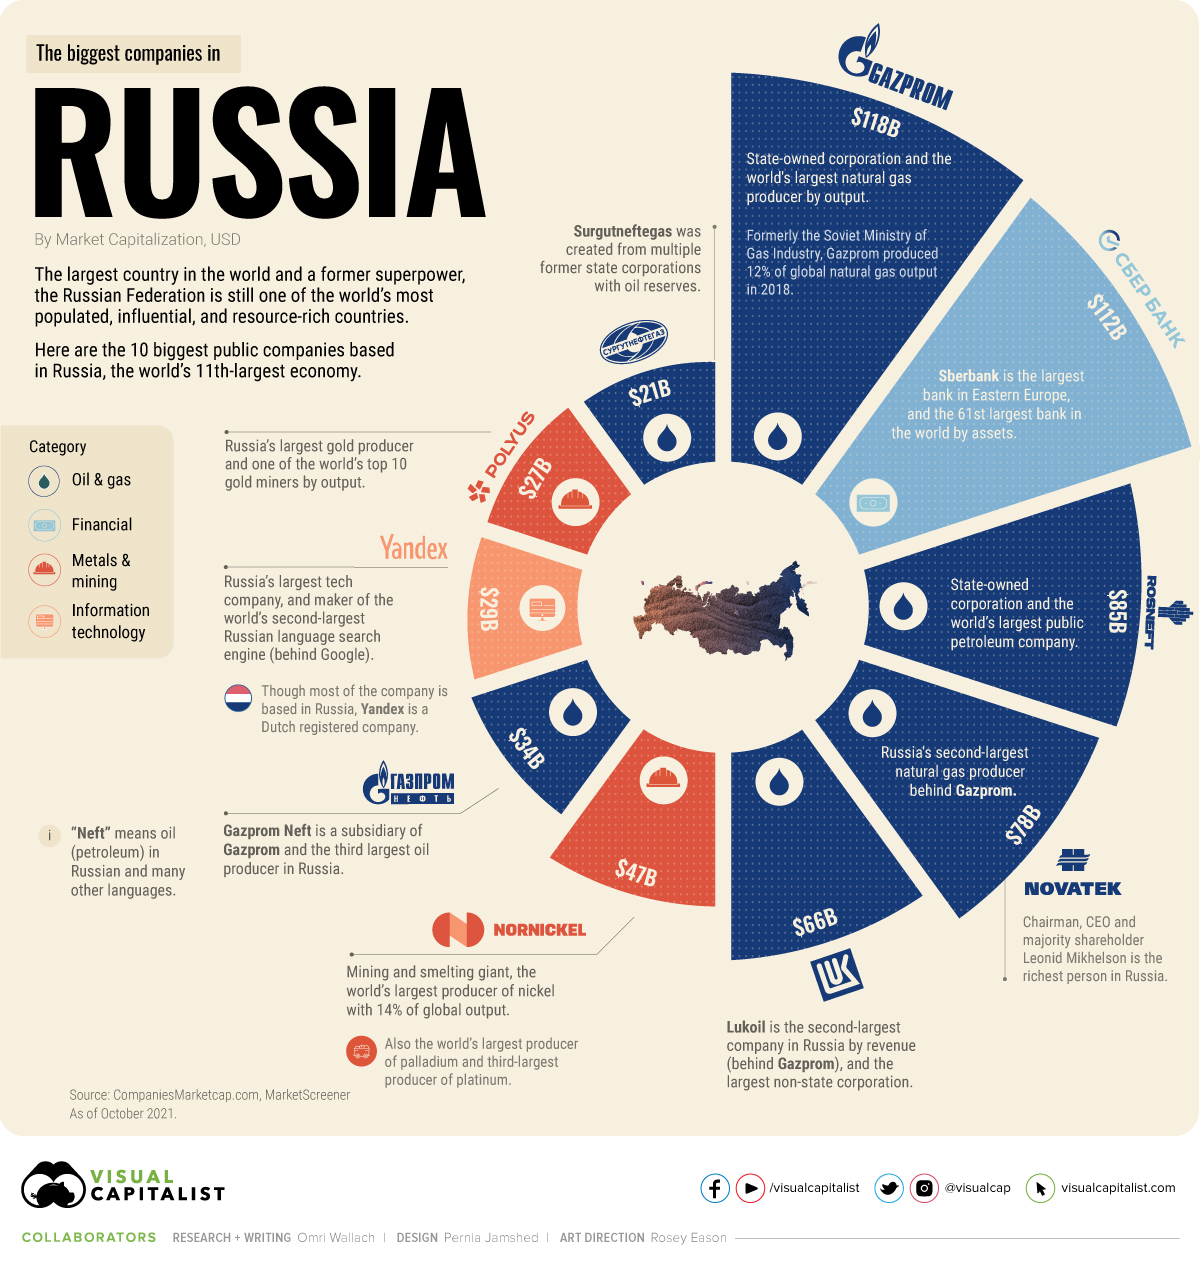 The Top 10 Biggest Companies in Russia